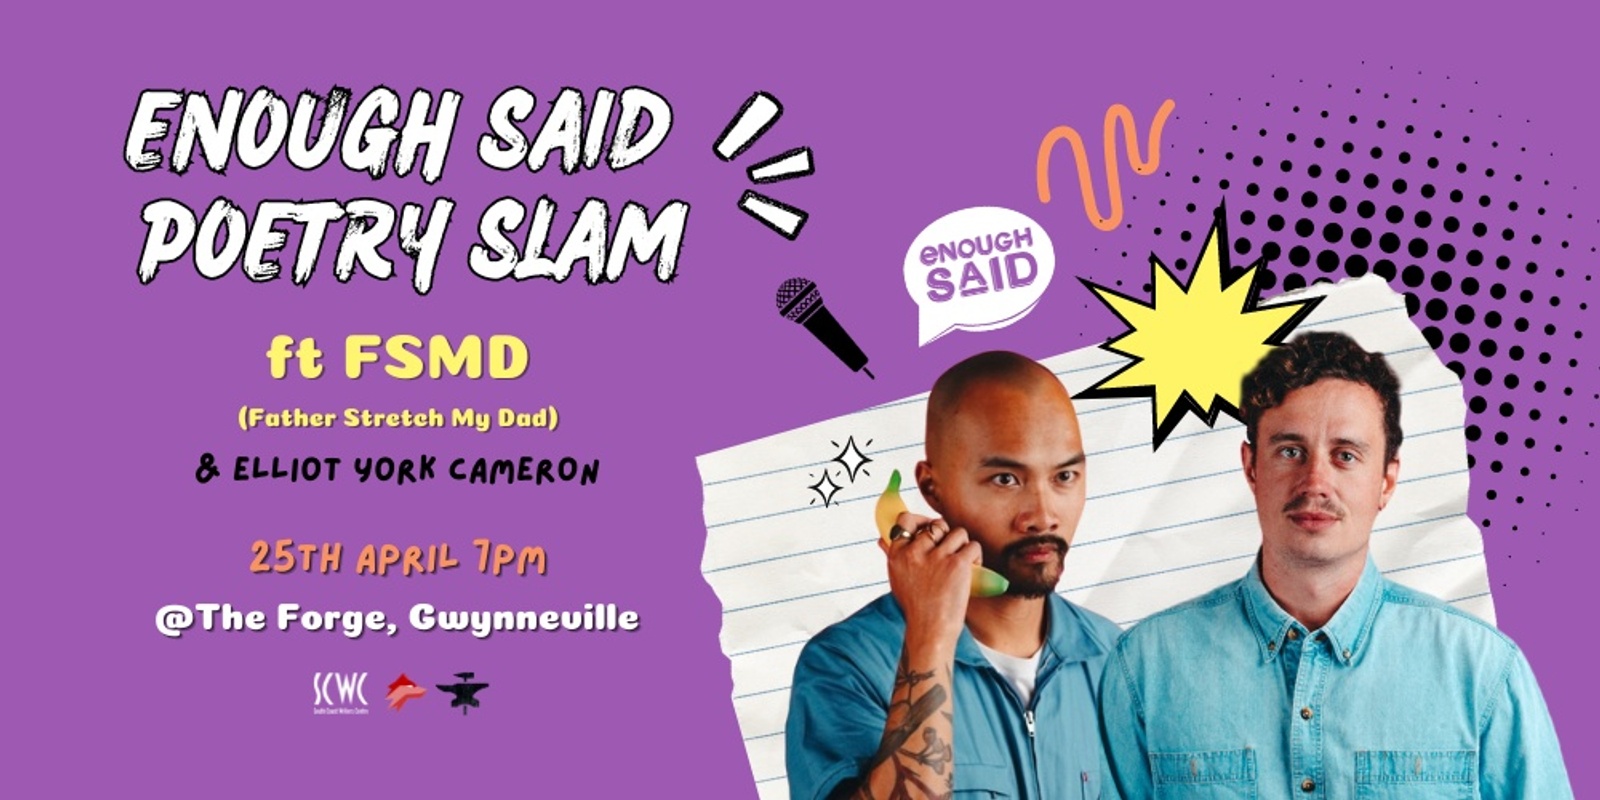 Banner image for Enough Said Poetry Slam ft. FSMD (Father Stretch My Dad)